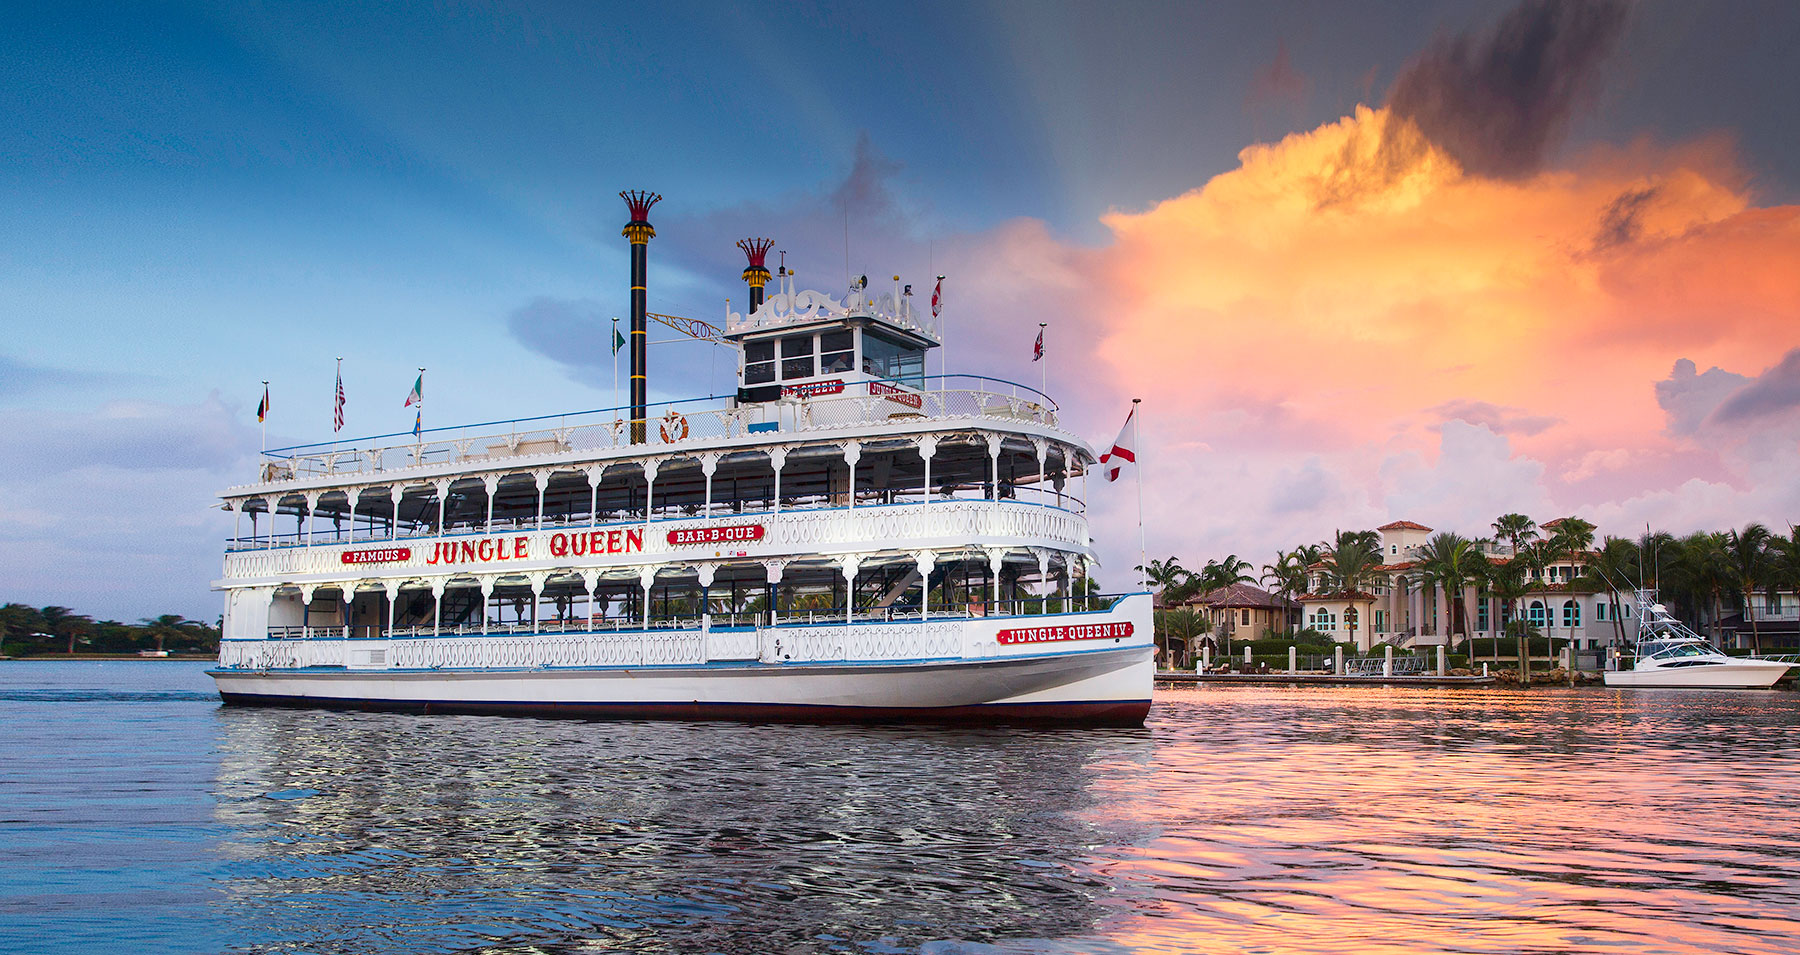 services offered by jungle queen riverboat